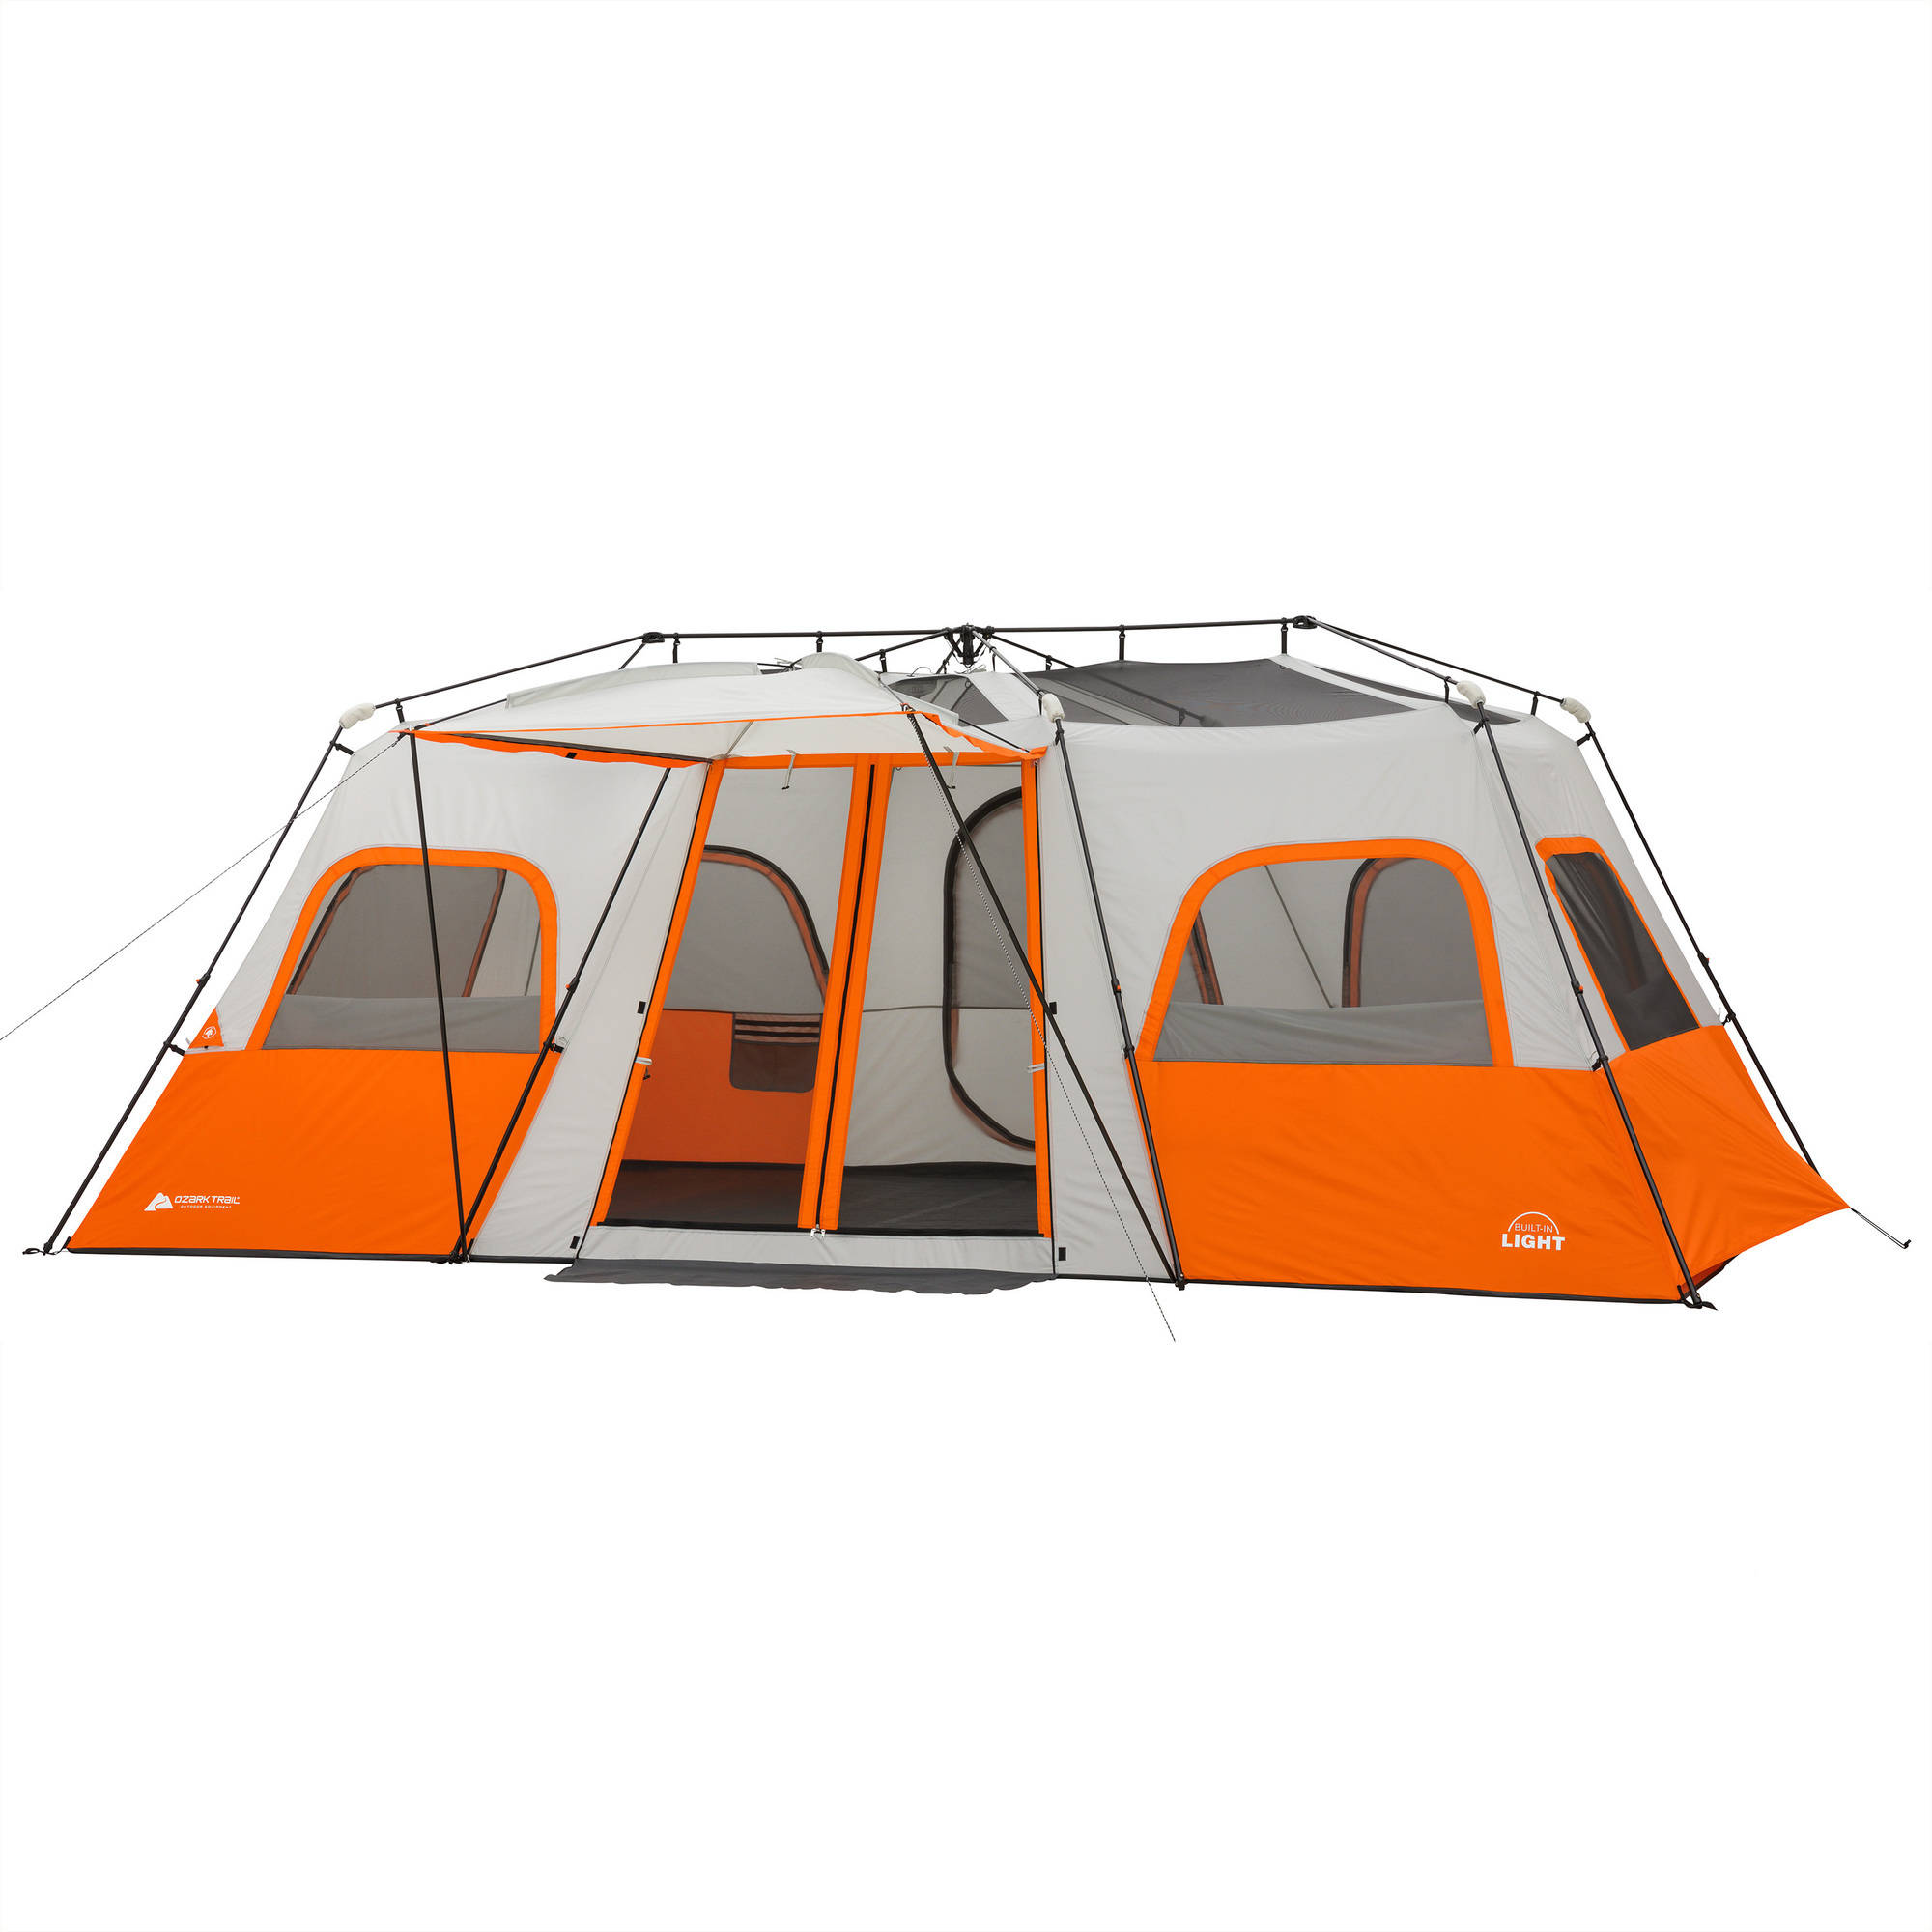 Ozark Trail 12 Person Instant Cabin Tent with Integrated LED Lights, 3 Rooms, 47.87 lbs - image 2 of 17